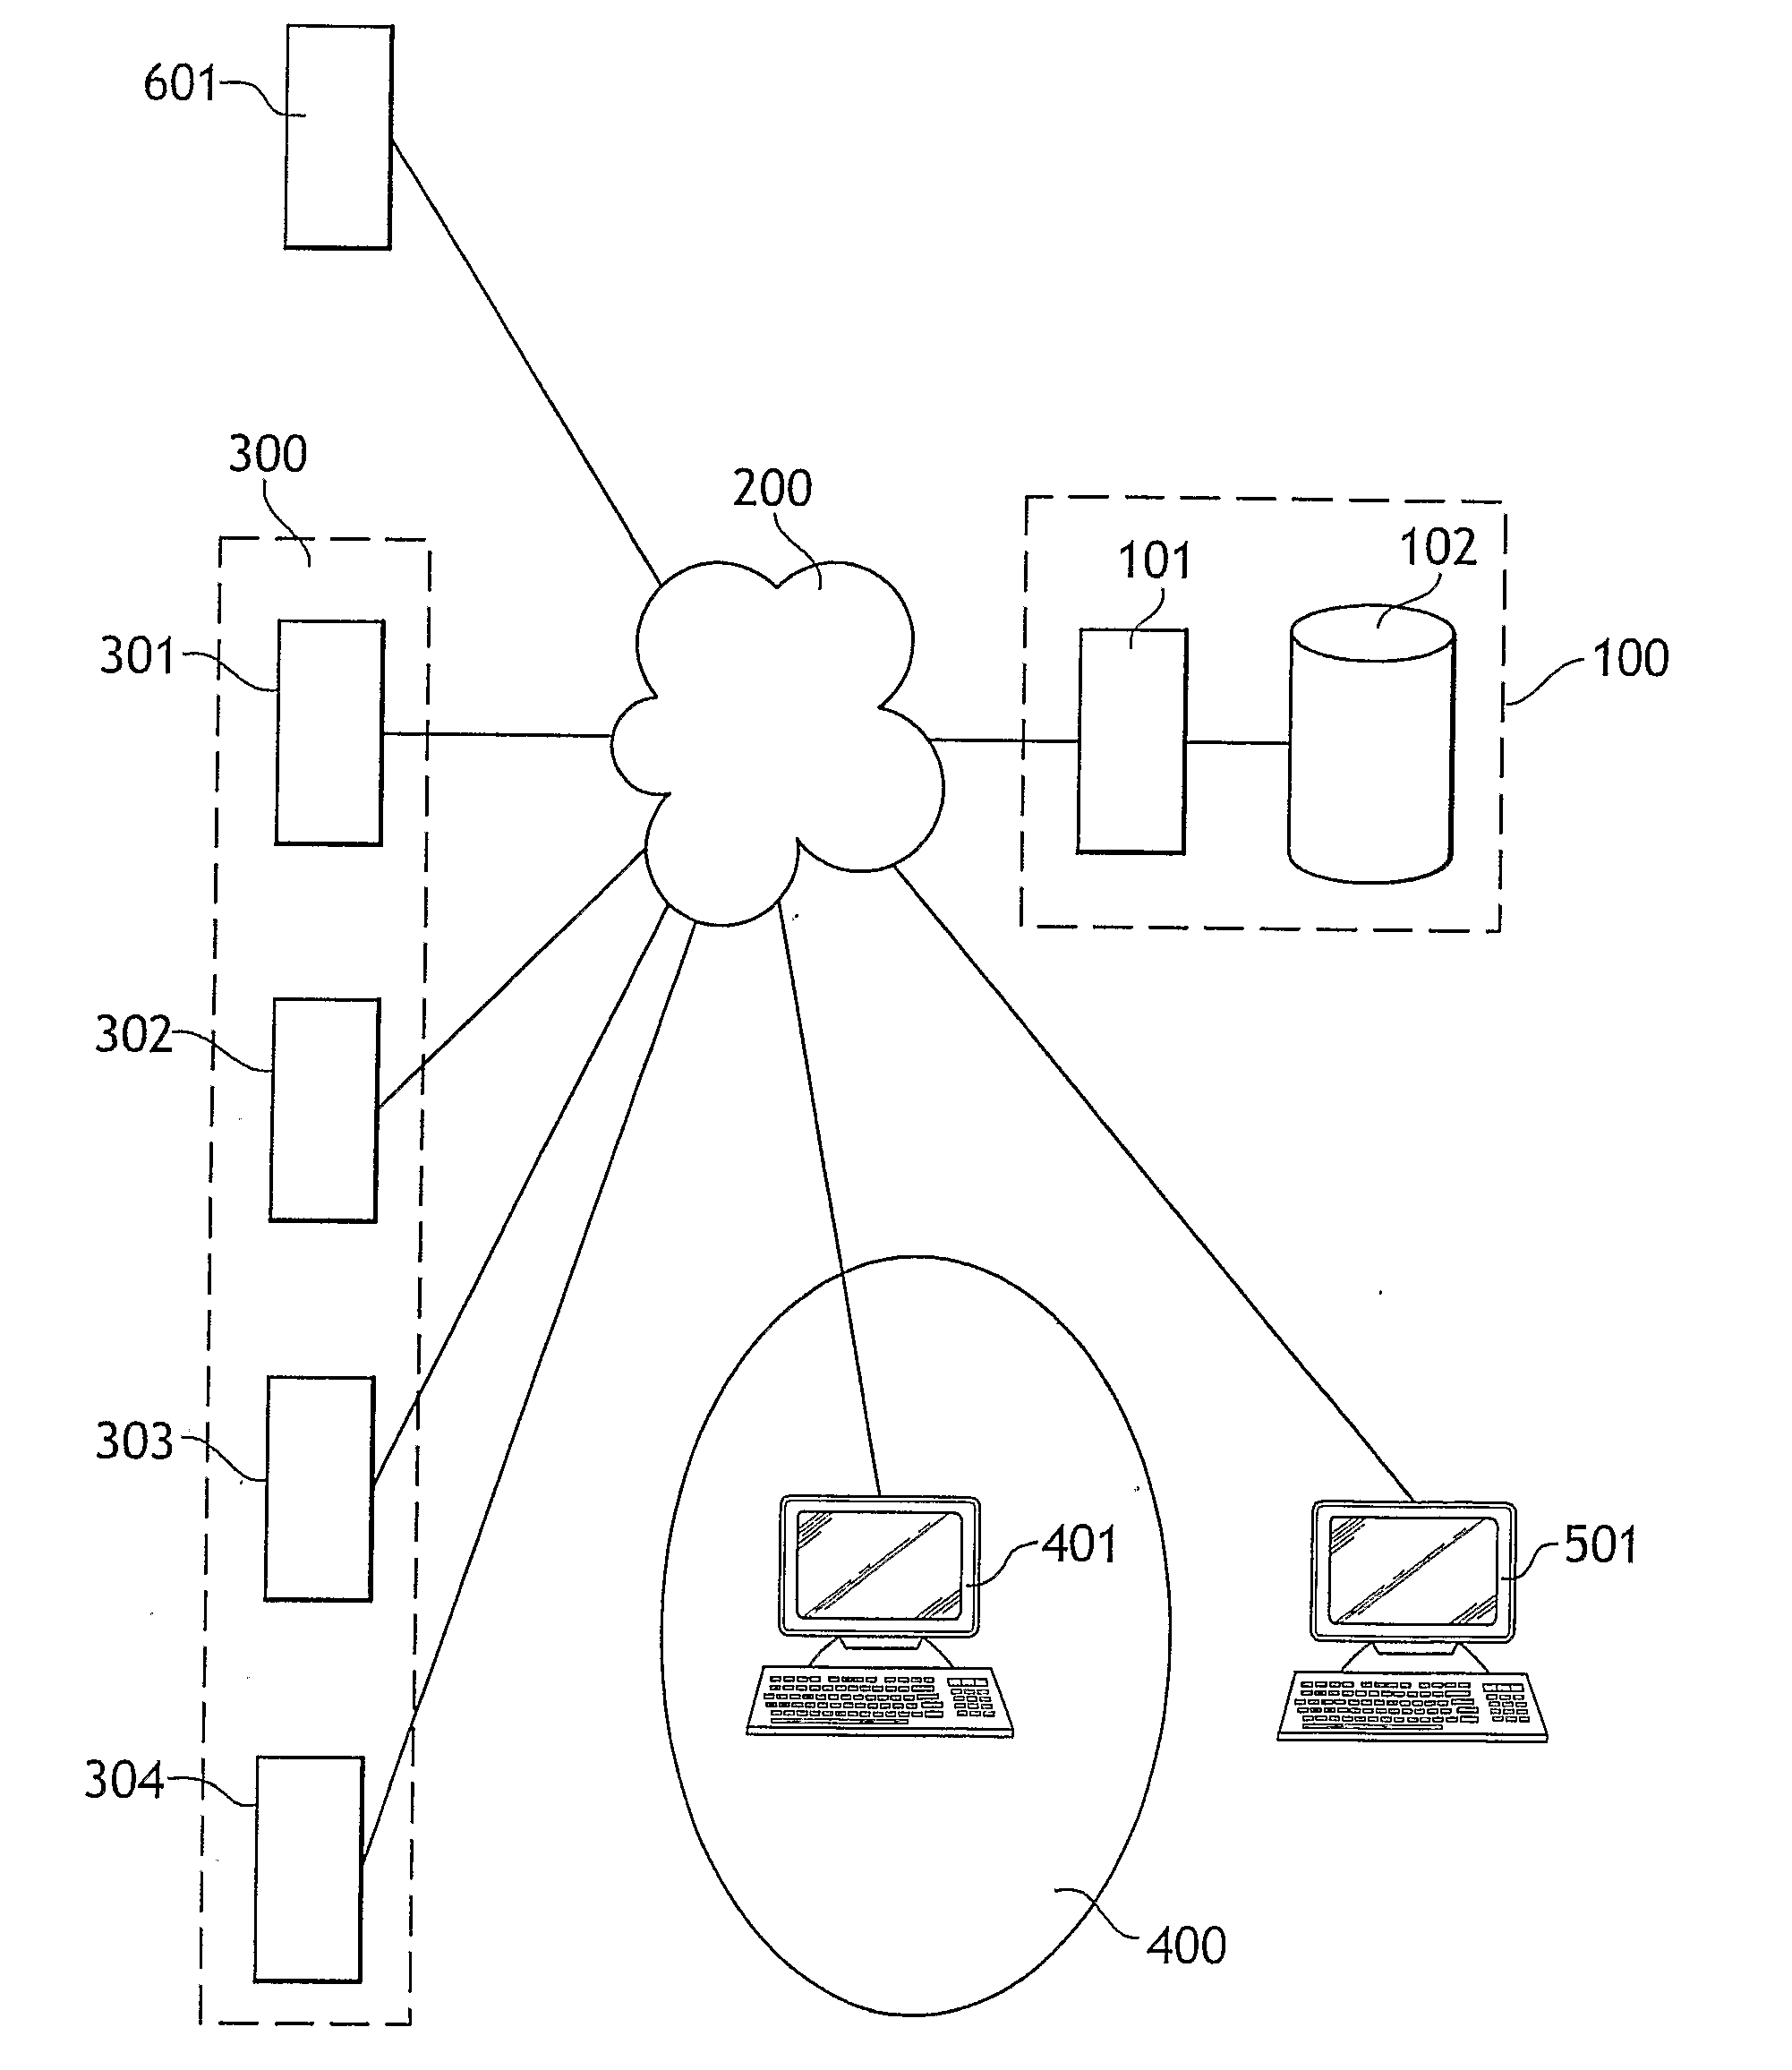 Method for determining a profile of a user of a communication network